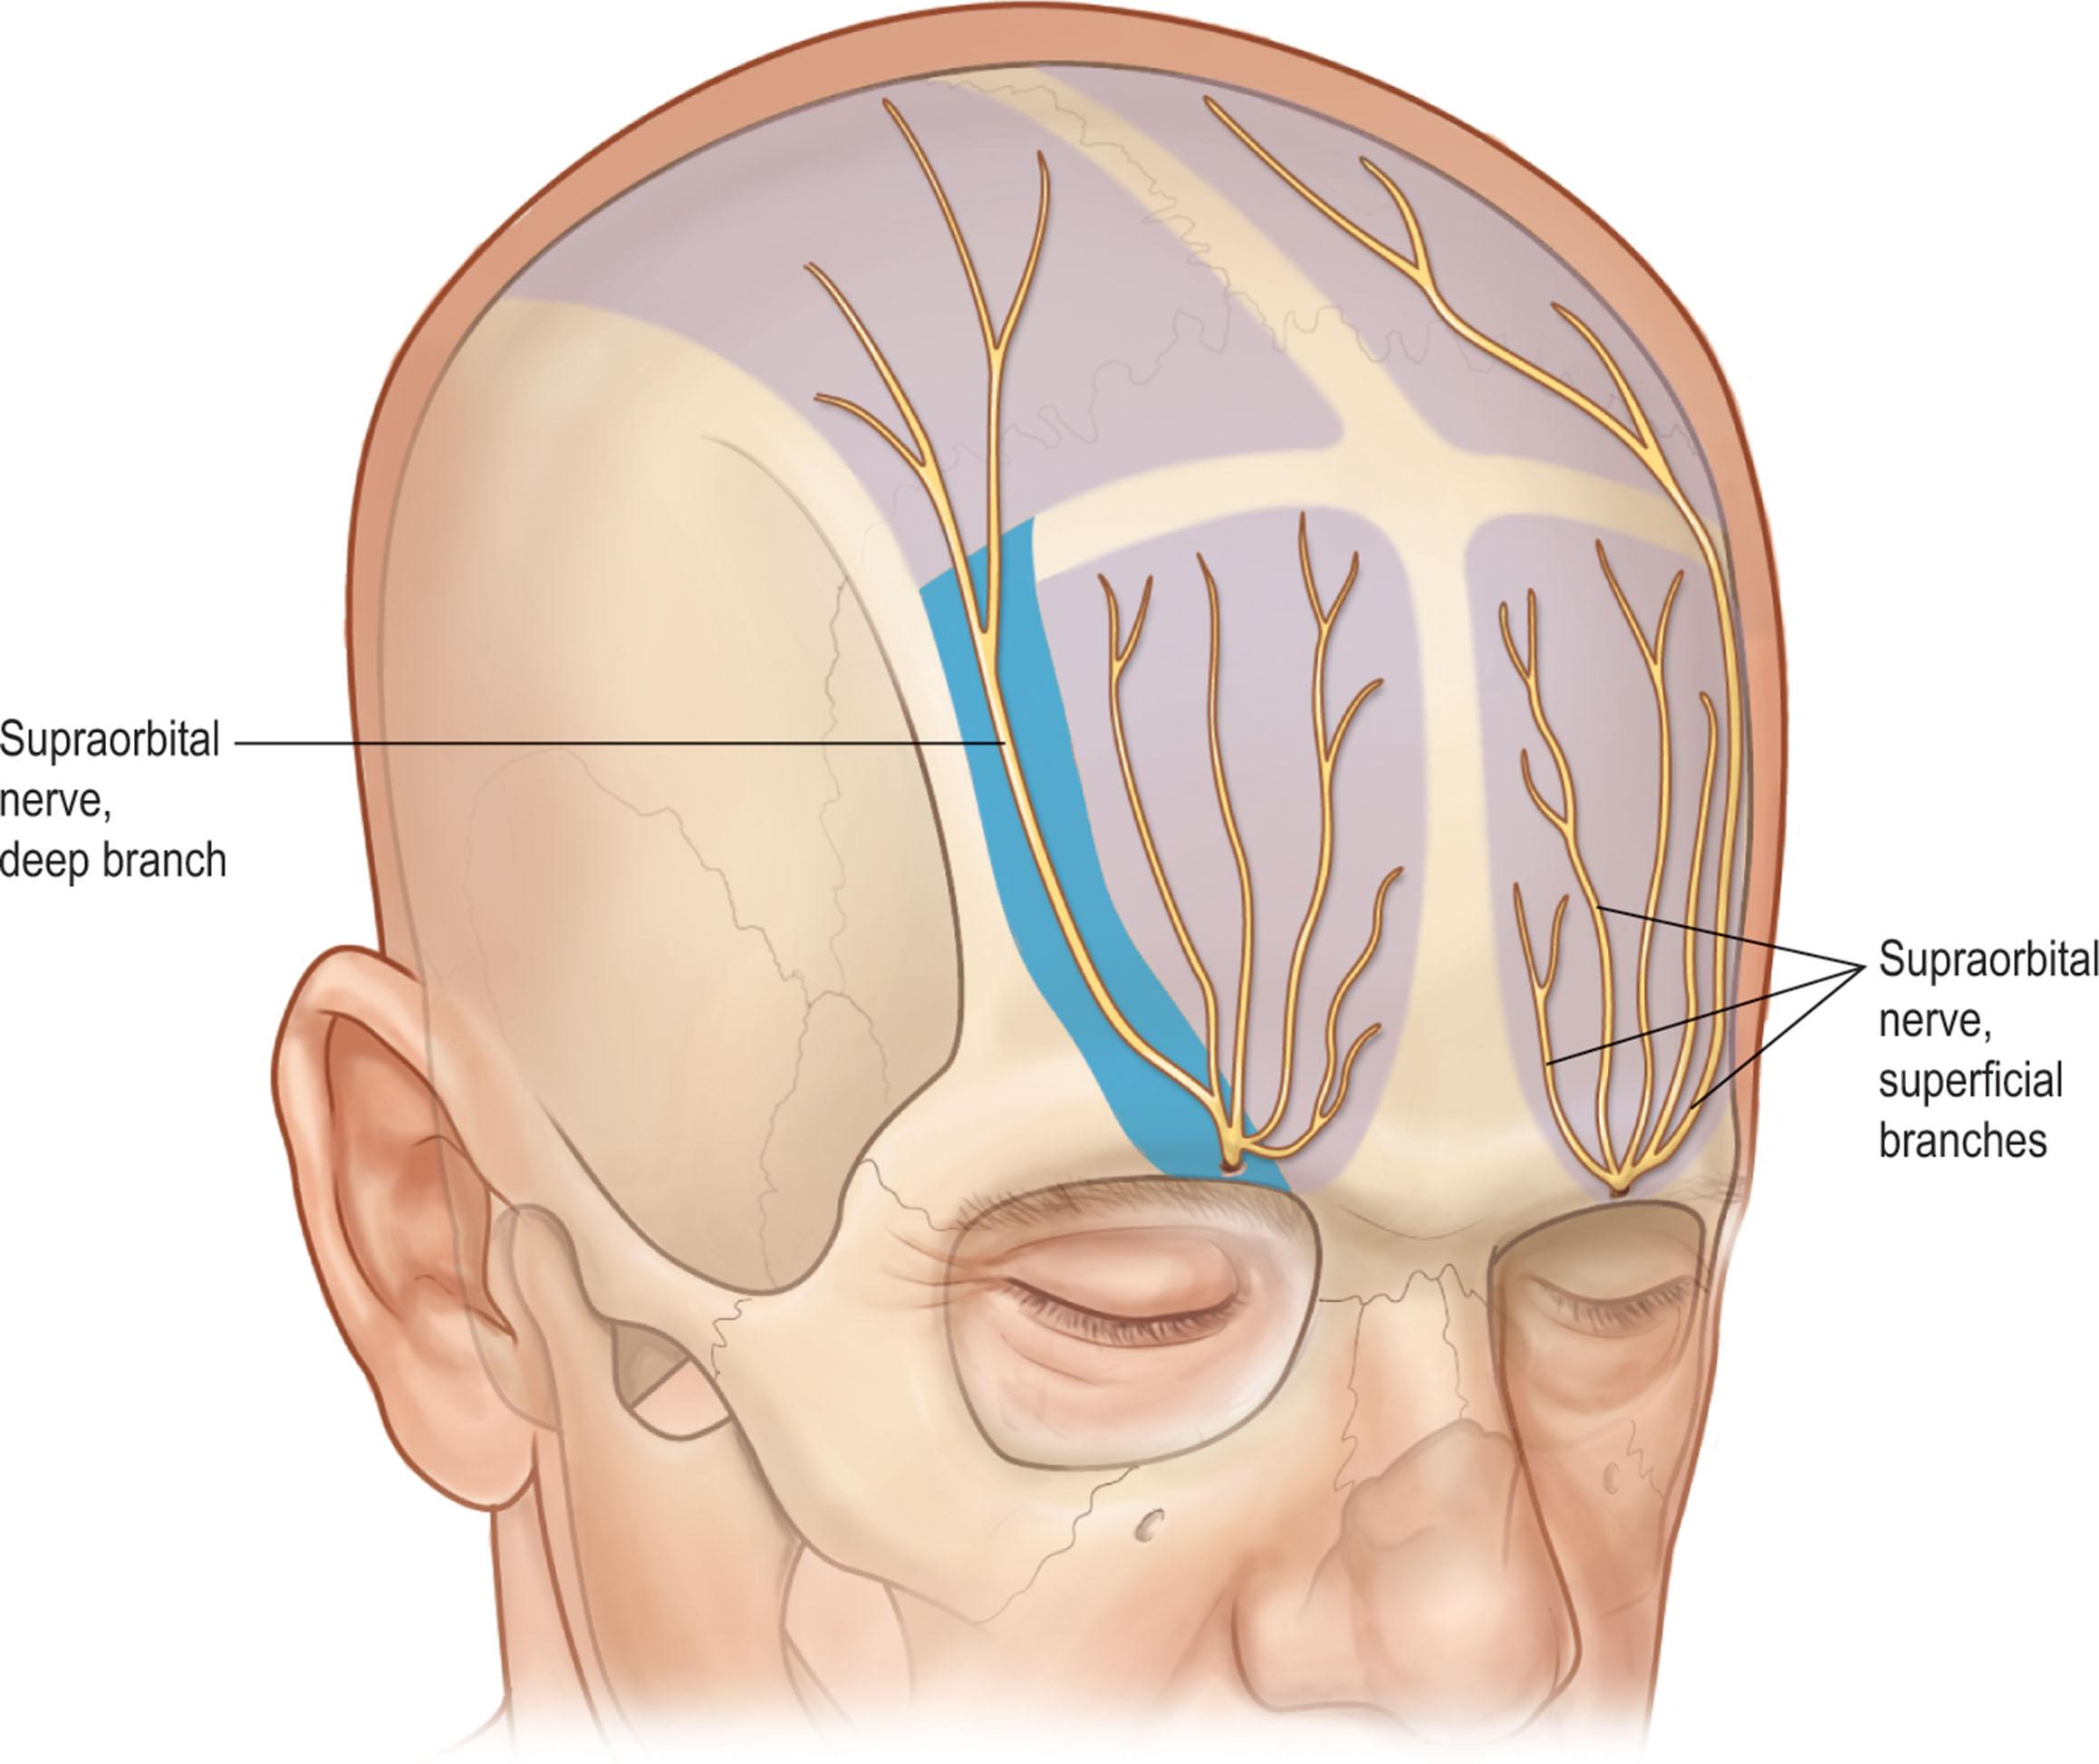 Figure 11.11, The deep branch of the supraorbital nerve travels in a 1-cm-wide band between 5 and 15 mm medial to the temporal ridge.